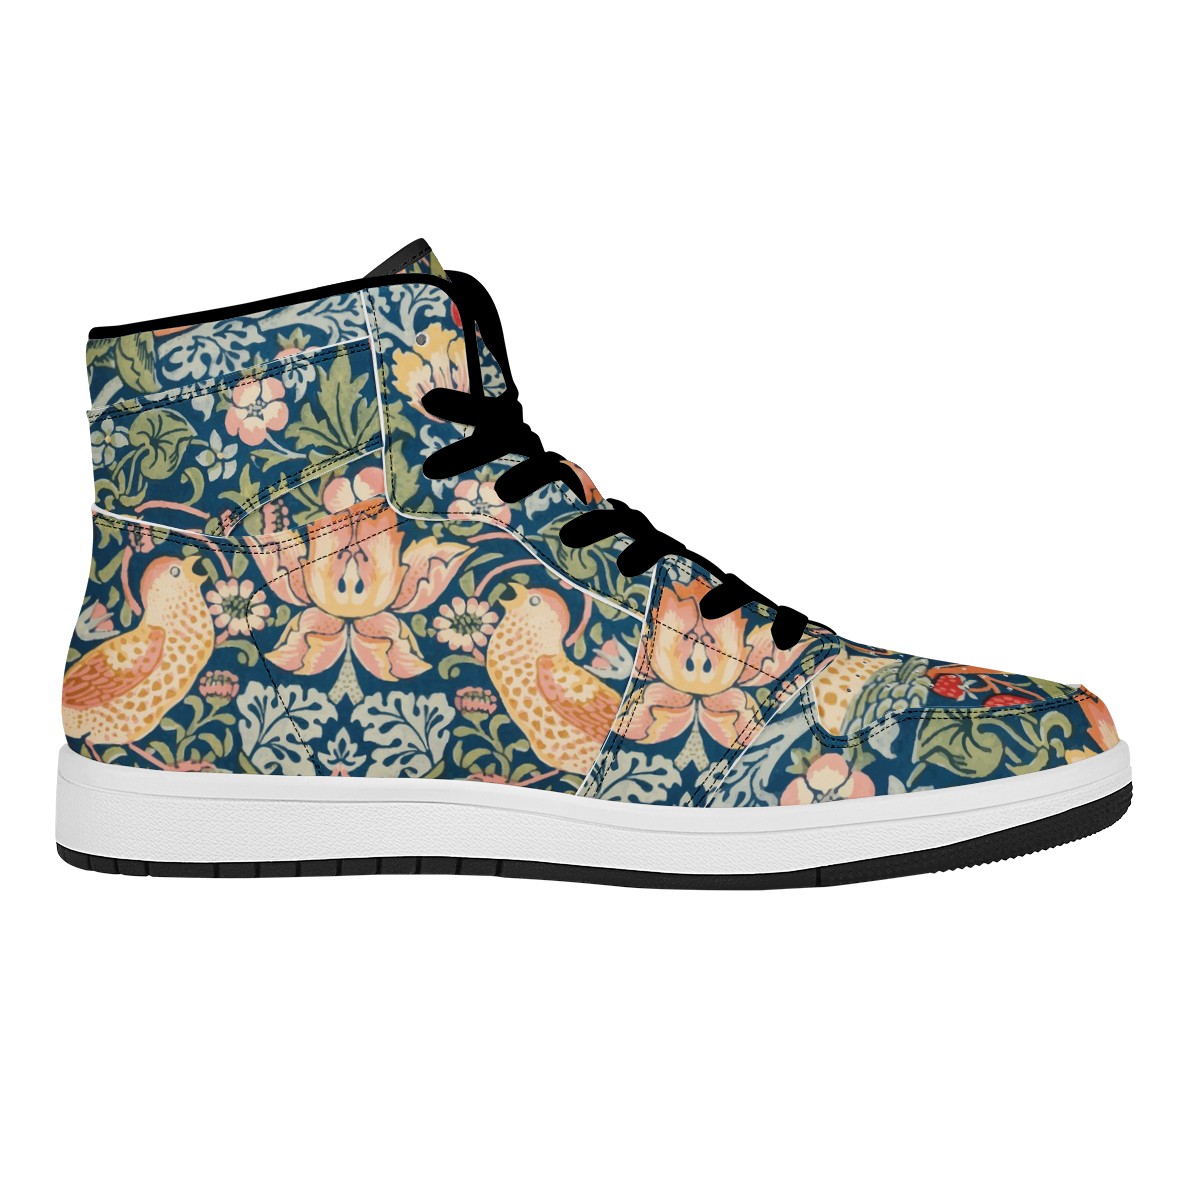 Art Nouveau William Morris "The Strawberry Thieves" Hi-Tops Black High Top Leather Sneakers